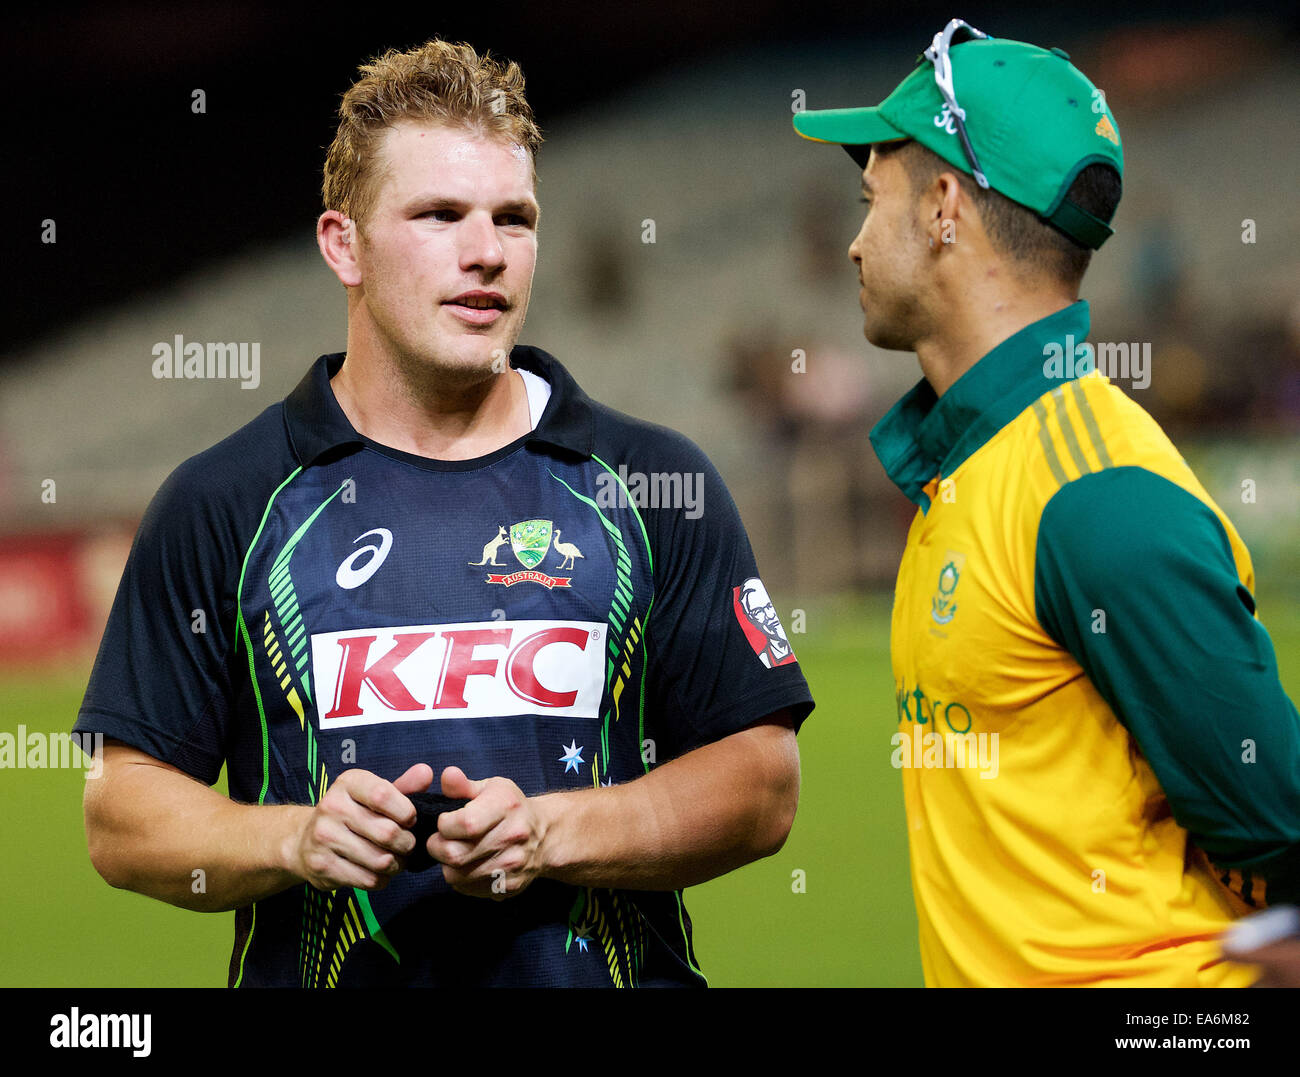 Melbourne, Victoria, Australia. 7th Nov, 2014.  AARON FINCH of Australia talks to JP DUMINY of South Africa during game two of the International Twenty20 cricket series match between Australia and South Africa at the MCG. Credit:  ZUMA Press, Inc./Alamy Live News Stock Photo